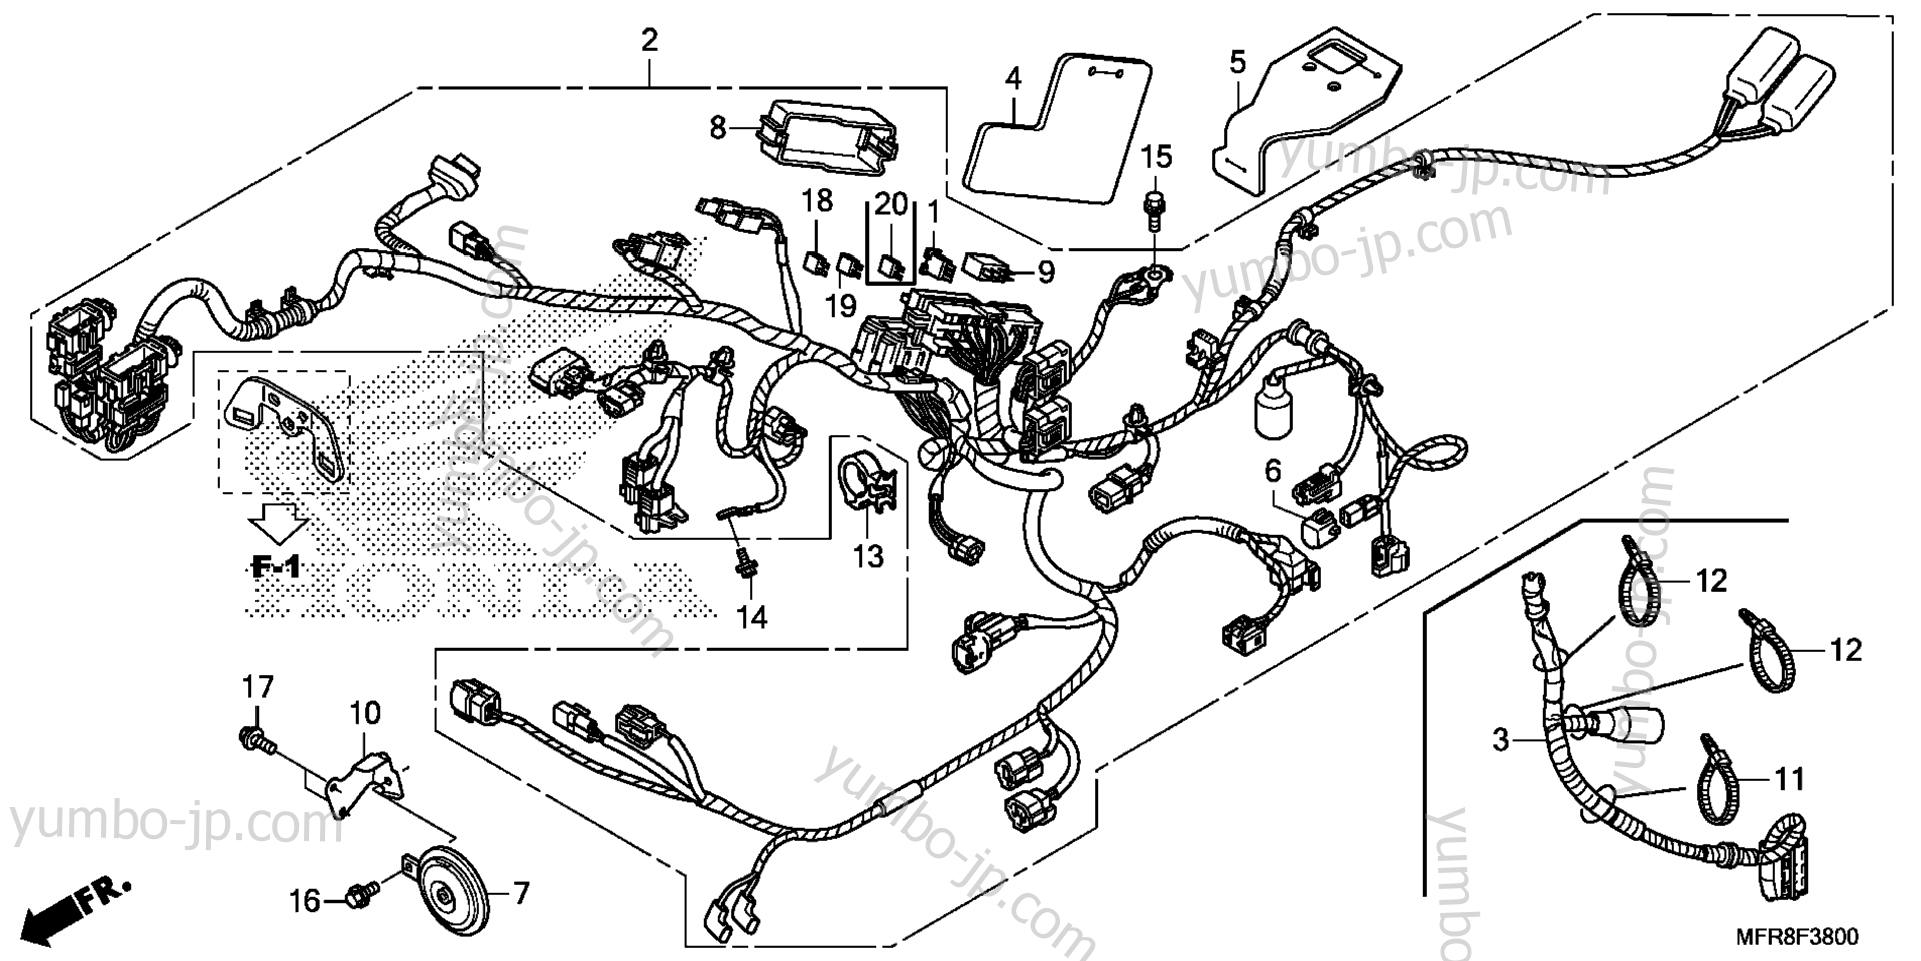 WIRE HARNESS (1) for motorcycles HONDA VT1300CT A 2014 year